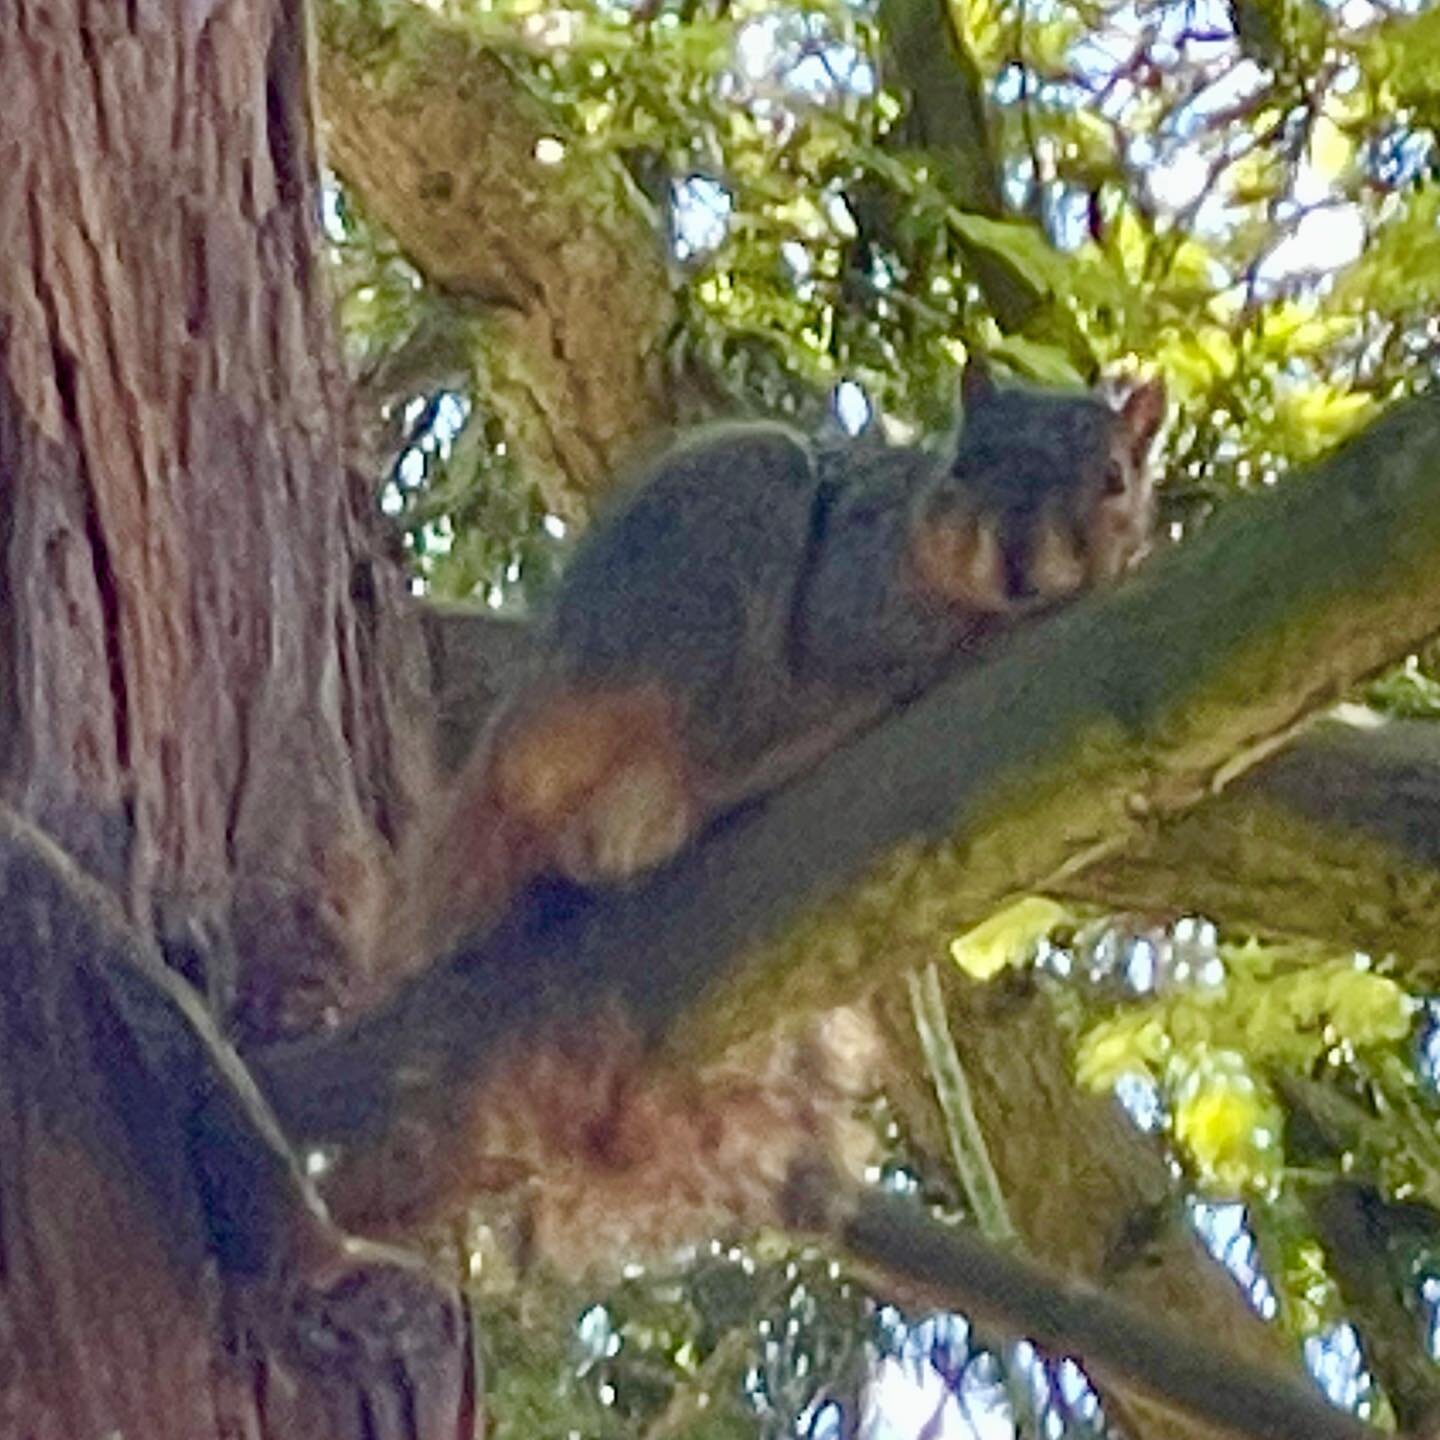 The weekend Northern California heat wave has one of our normally hyperactive backyard Berkeley squirrels chilling out high in the redwood. #berkeley #california #heatwave #squirrel